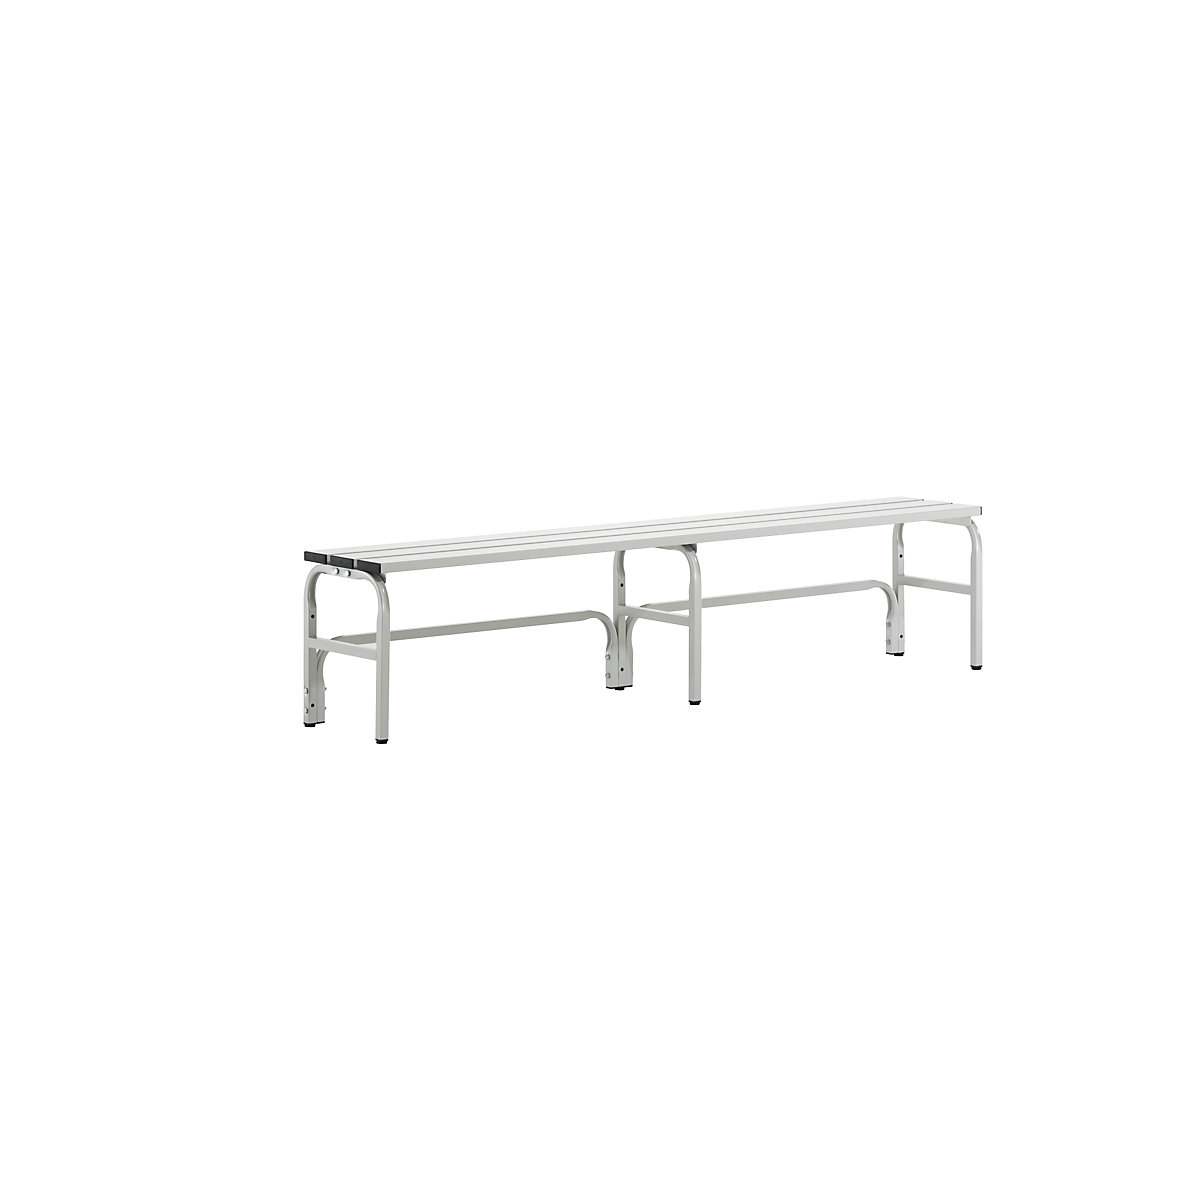 Sypro – Changing room bench with aluminium slats, HxD 450 x 350 mm, length 1500 mm, light grey